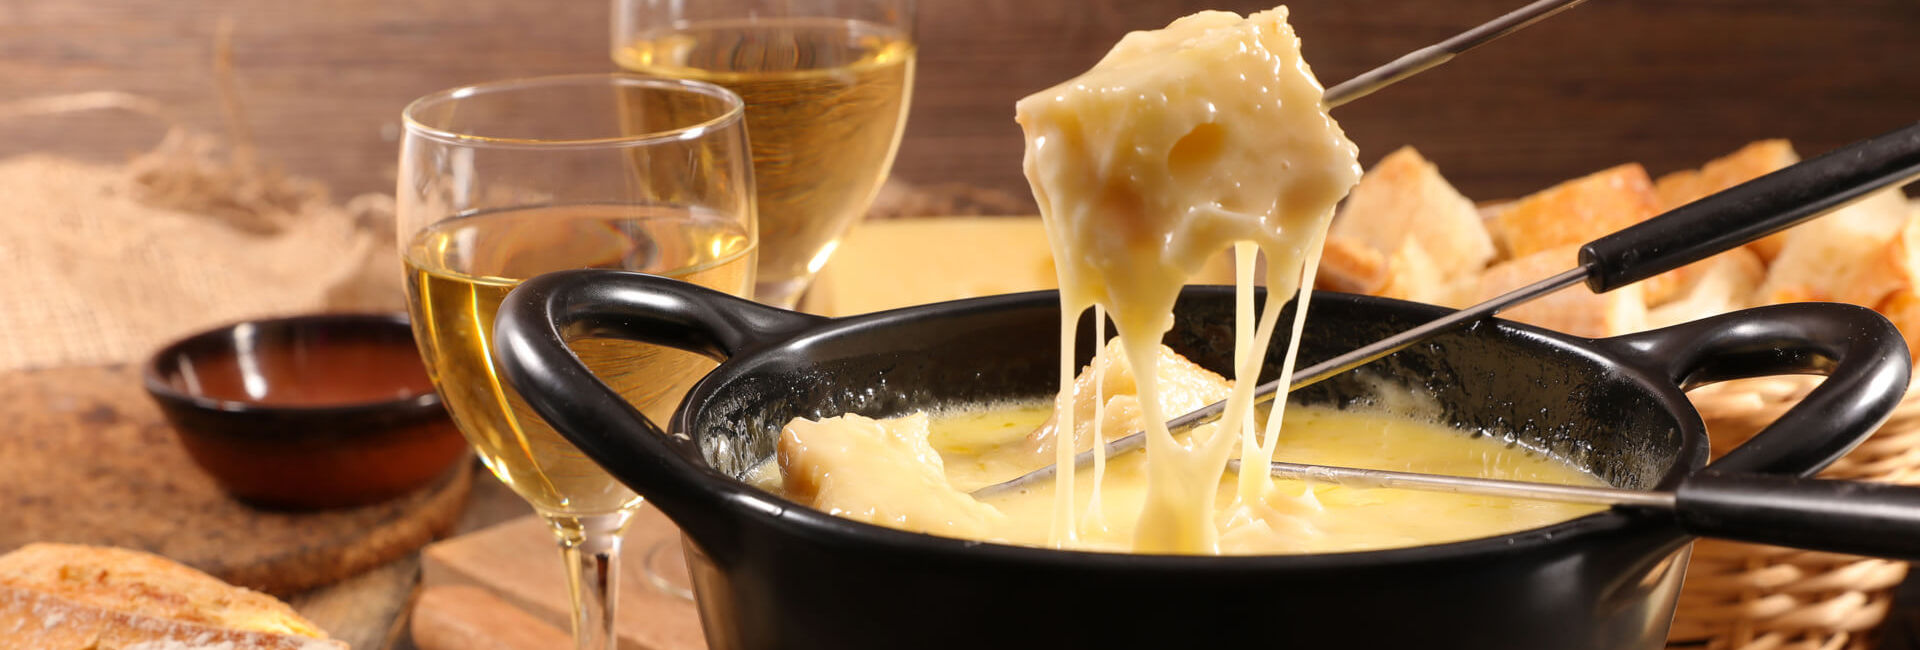 Cheese fondue and two glasses of white wine - Grill Tasting package Gasterij 't Karrewiel